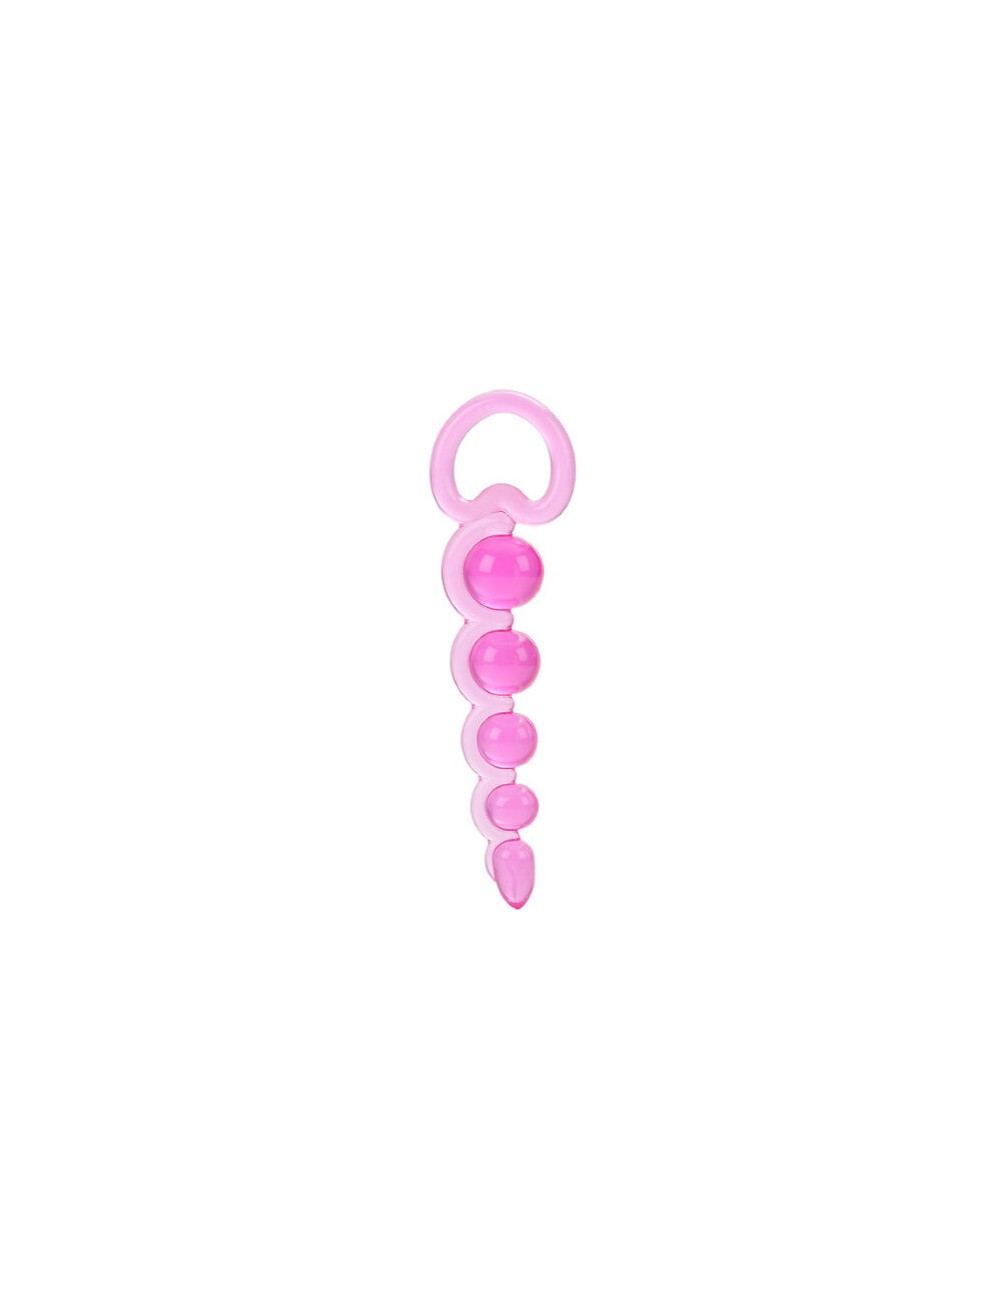 THRUSTER LOVE RIDER EN SILICONE CALEX 10 FONCTIONS - ROSE